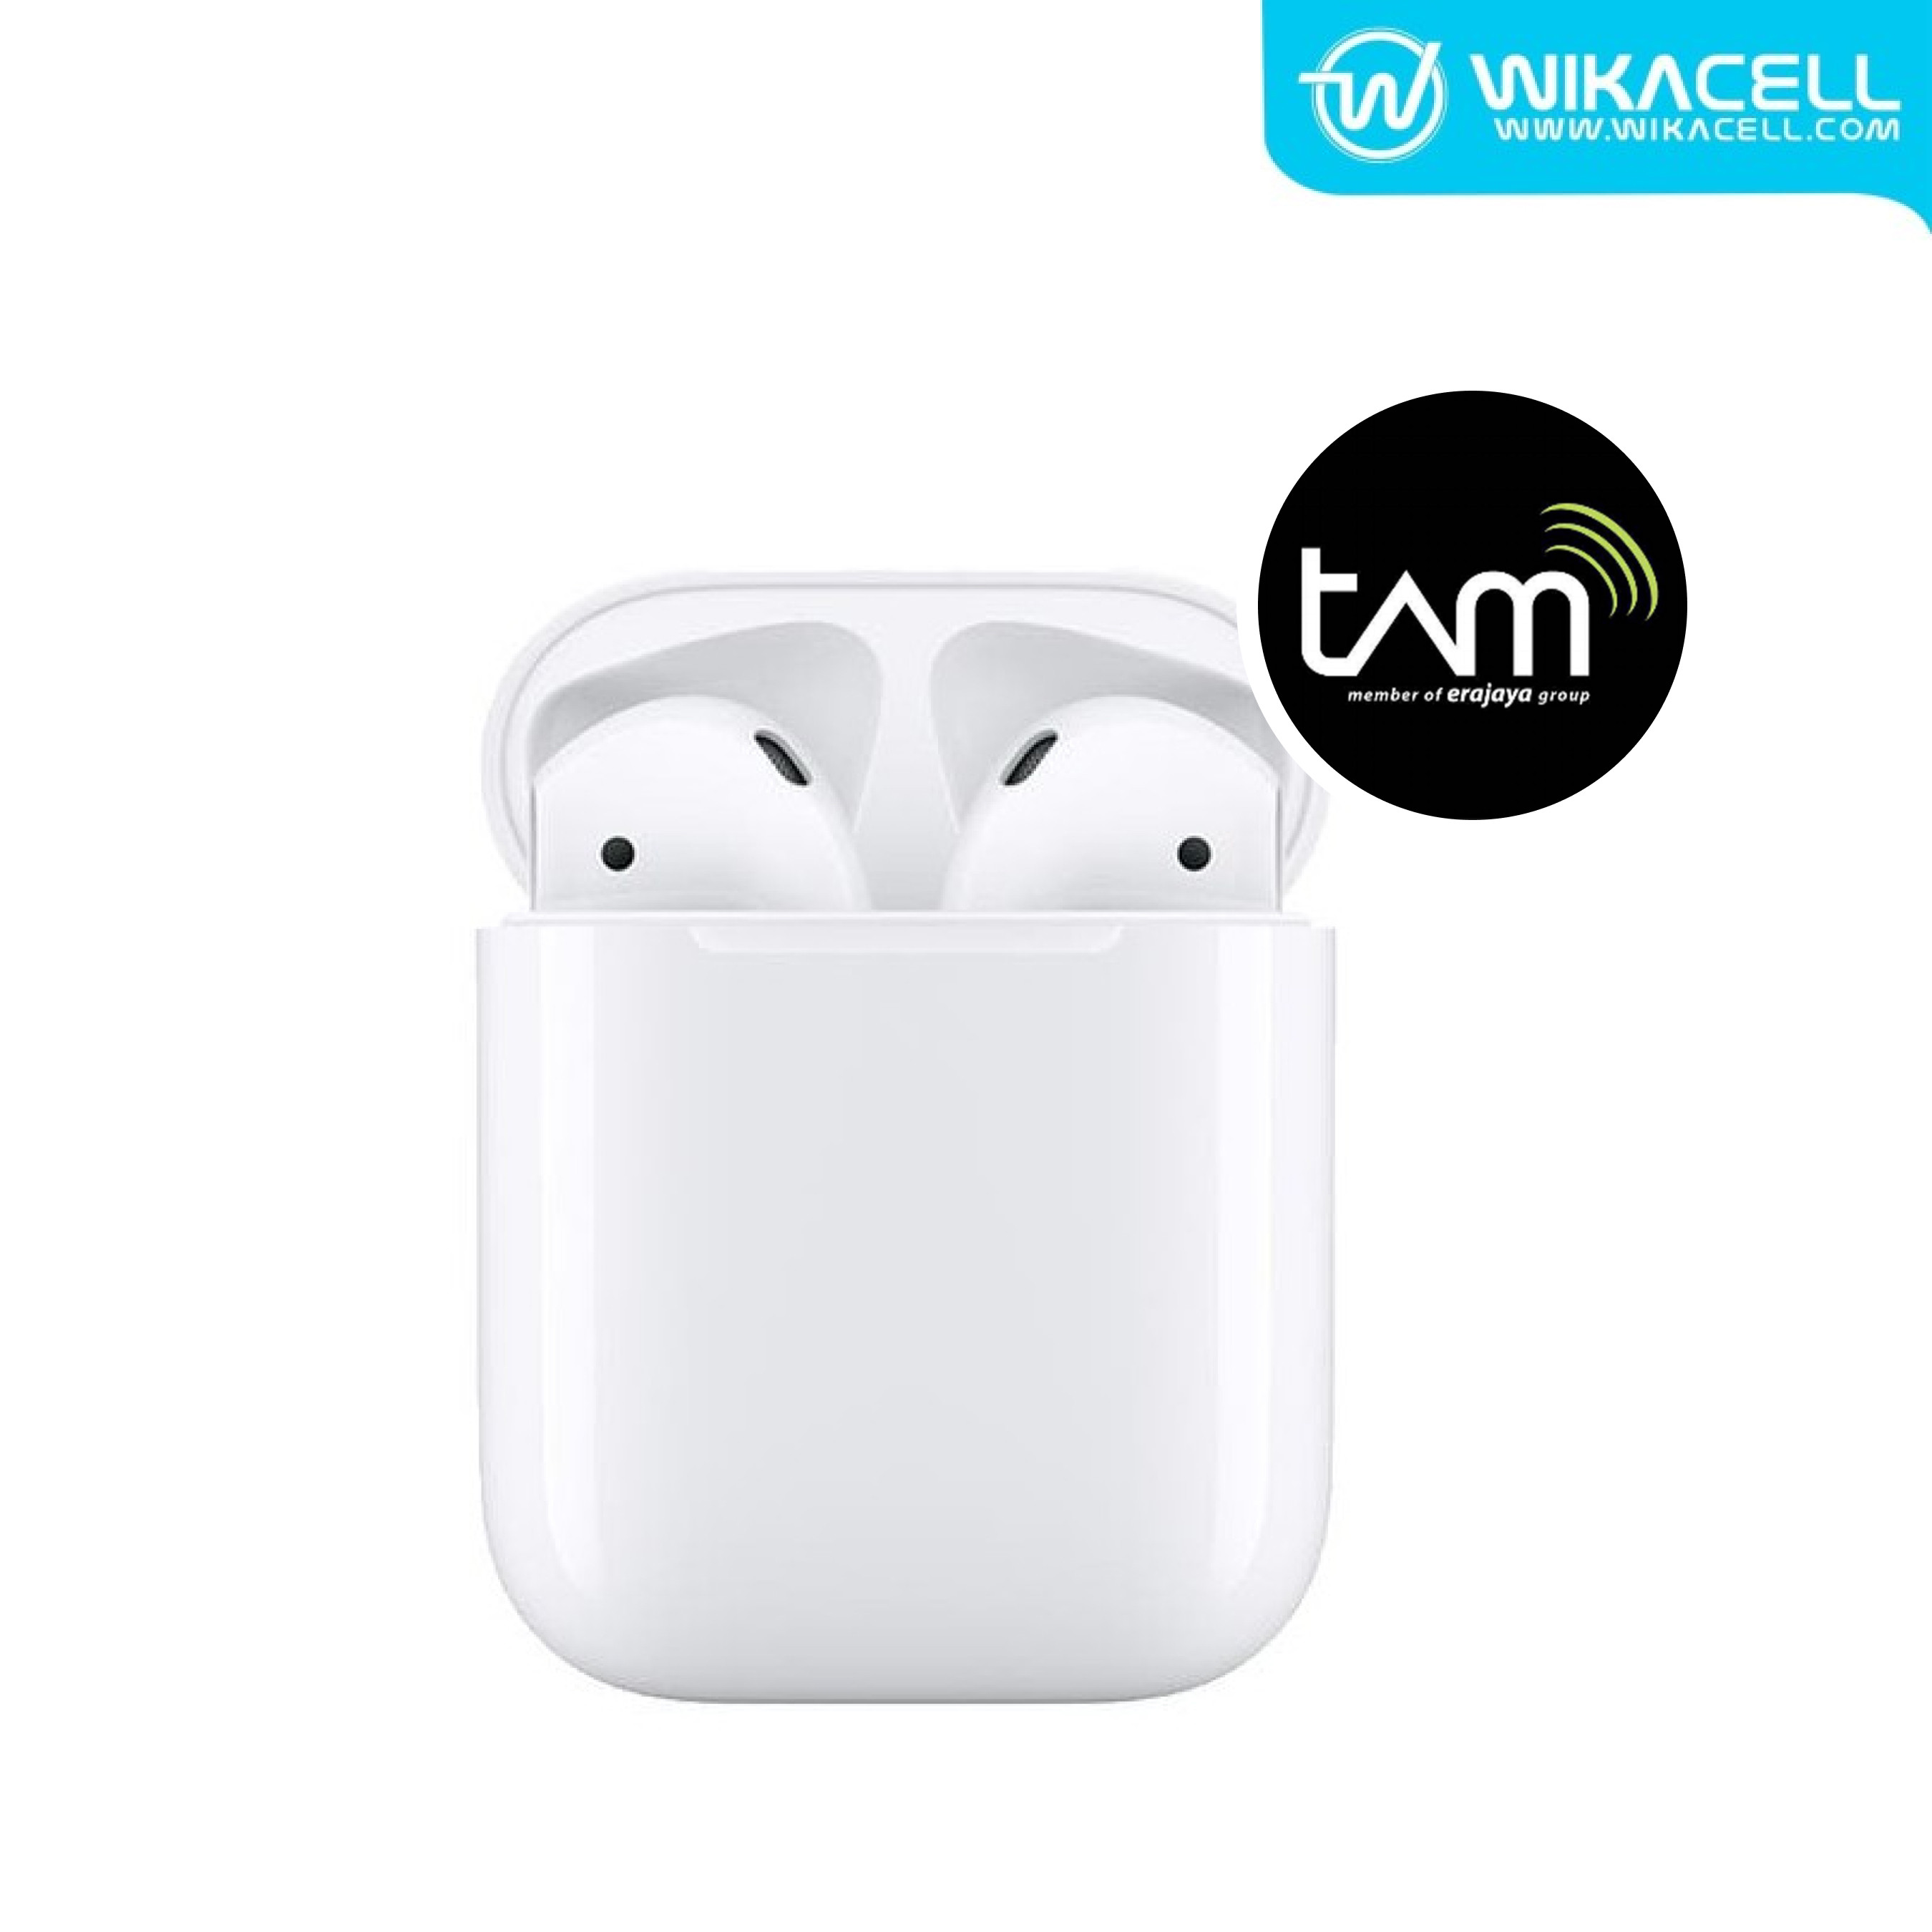 Apple Airpods 2 With Wireless Charging Case MRXJ2 - White TAM